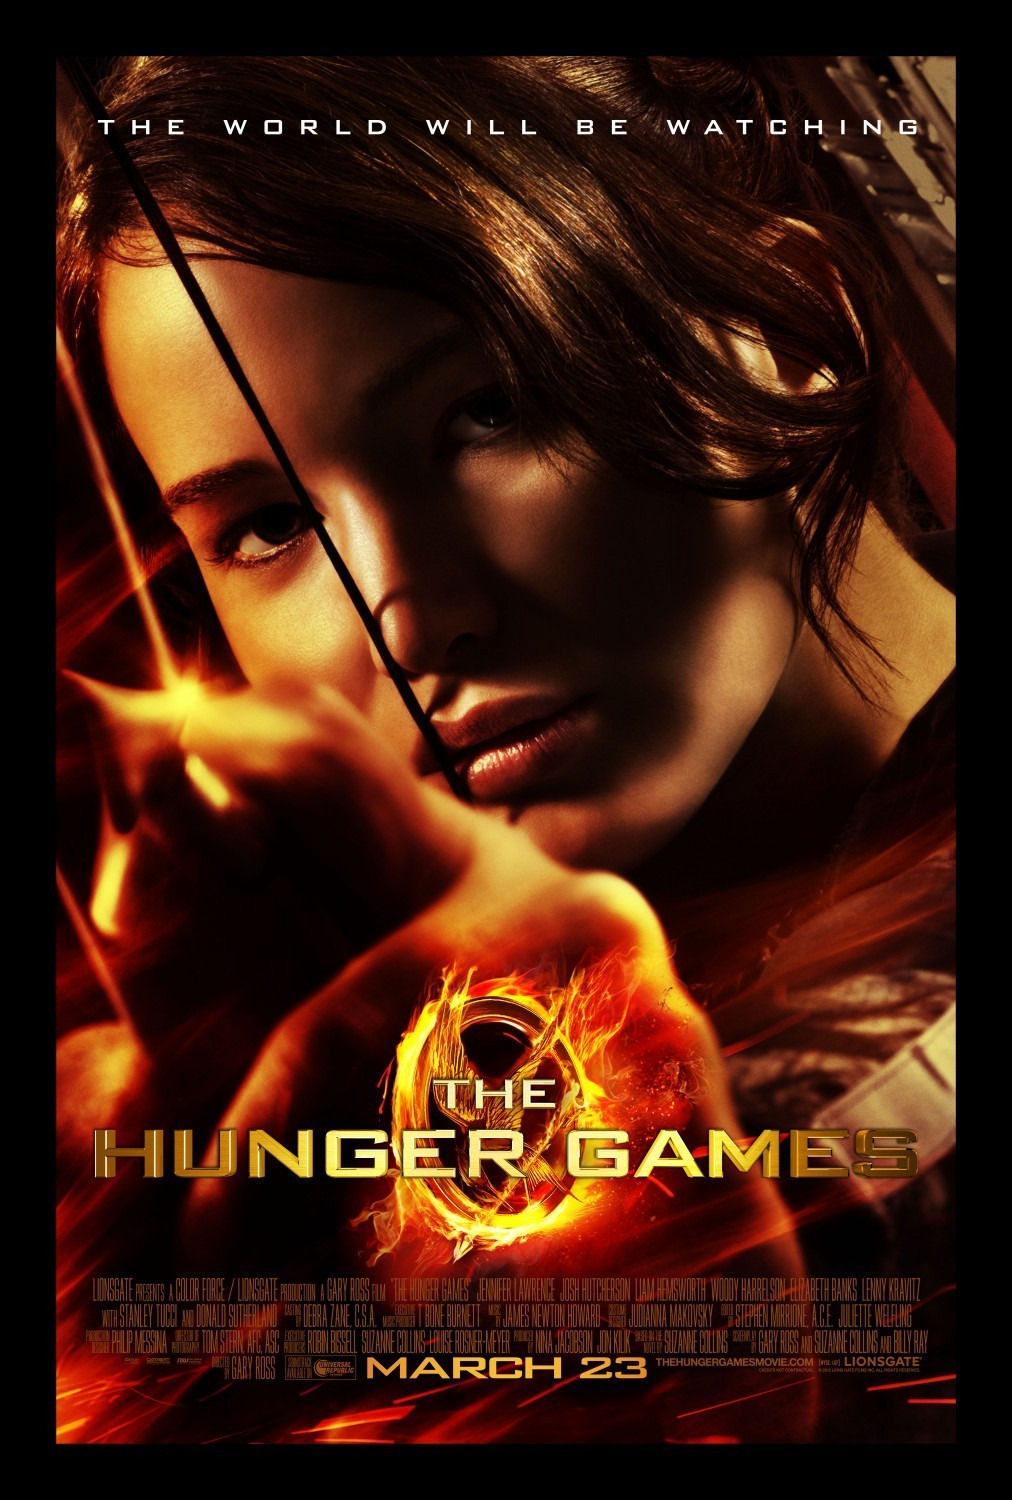 The Hunger Games: The World Will Be Watching (2012)